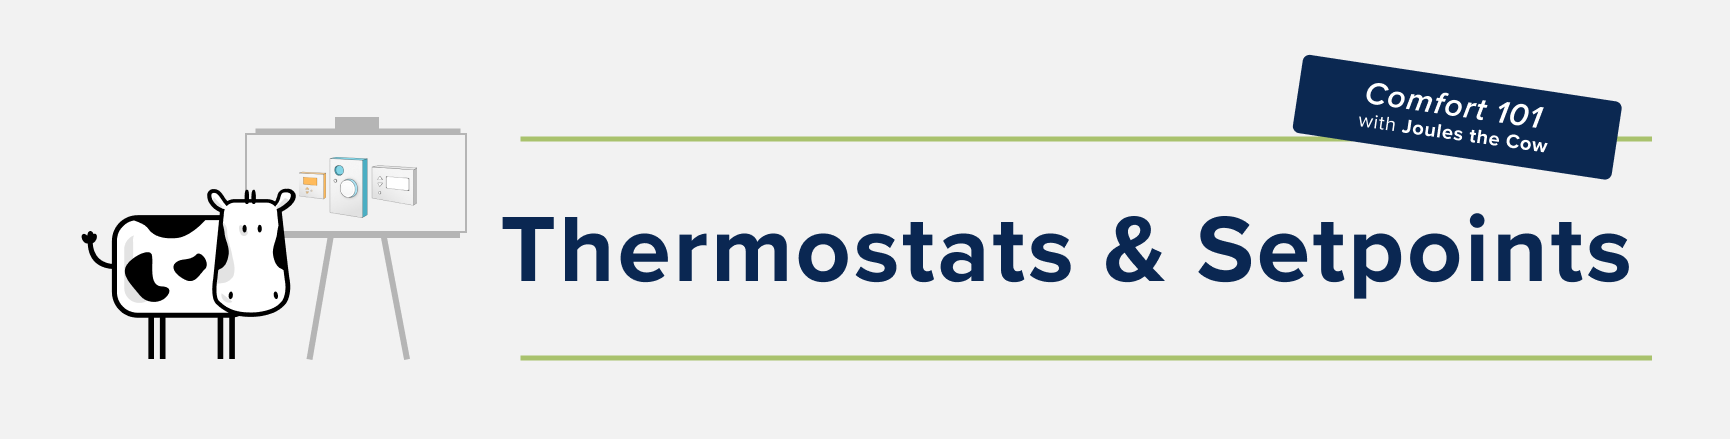 Thermostats & Setpoints Banner